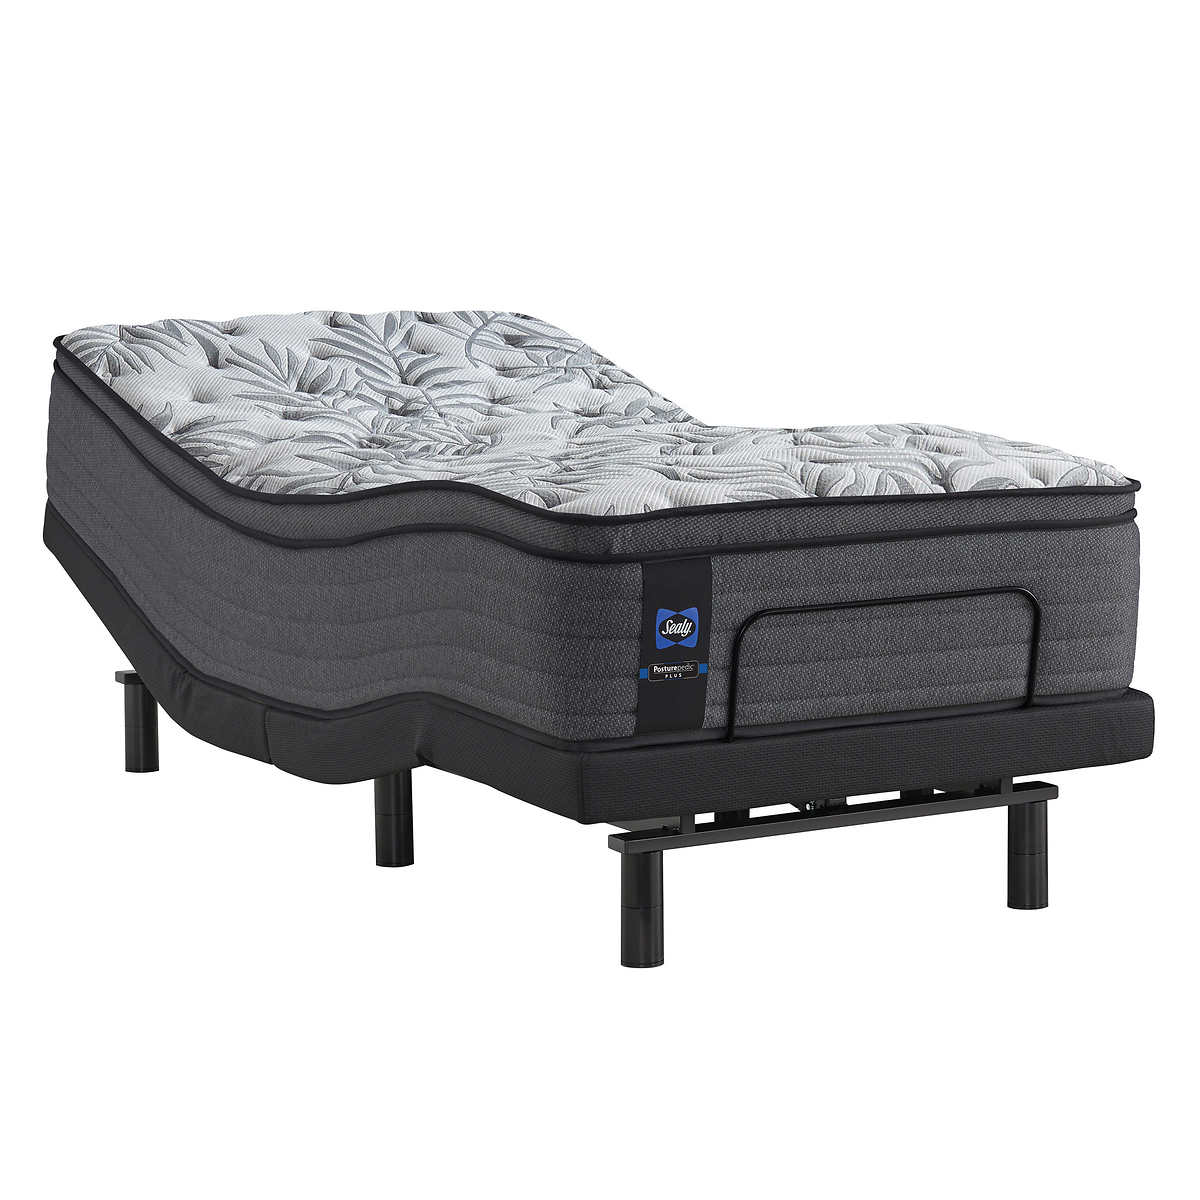 Sealy Posturepedic Island Cays Firm, Costco Bed In A Box Twin Xl Size